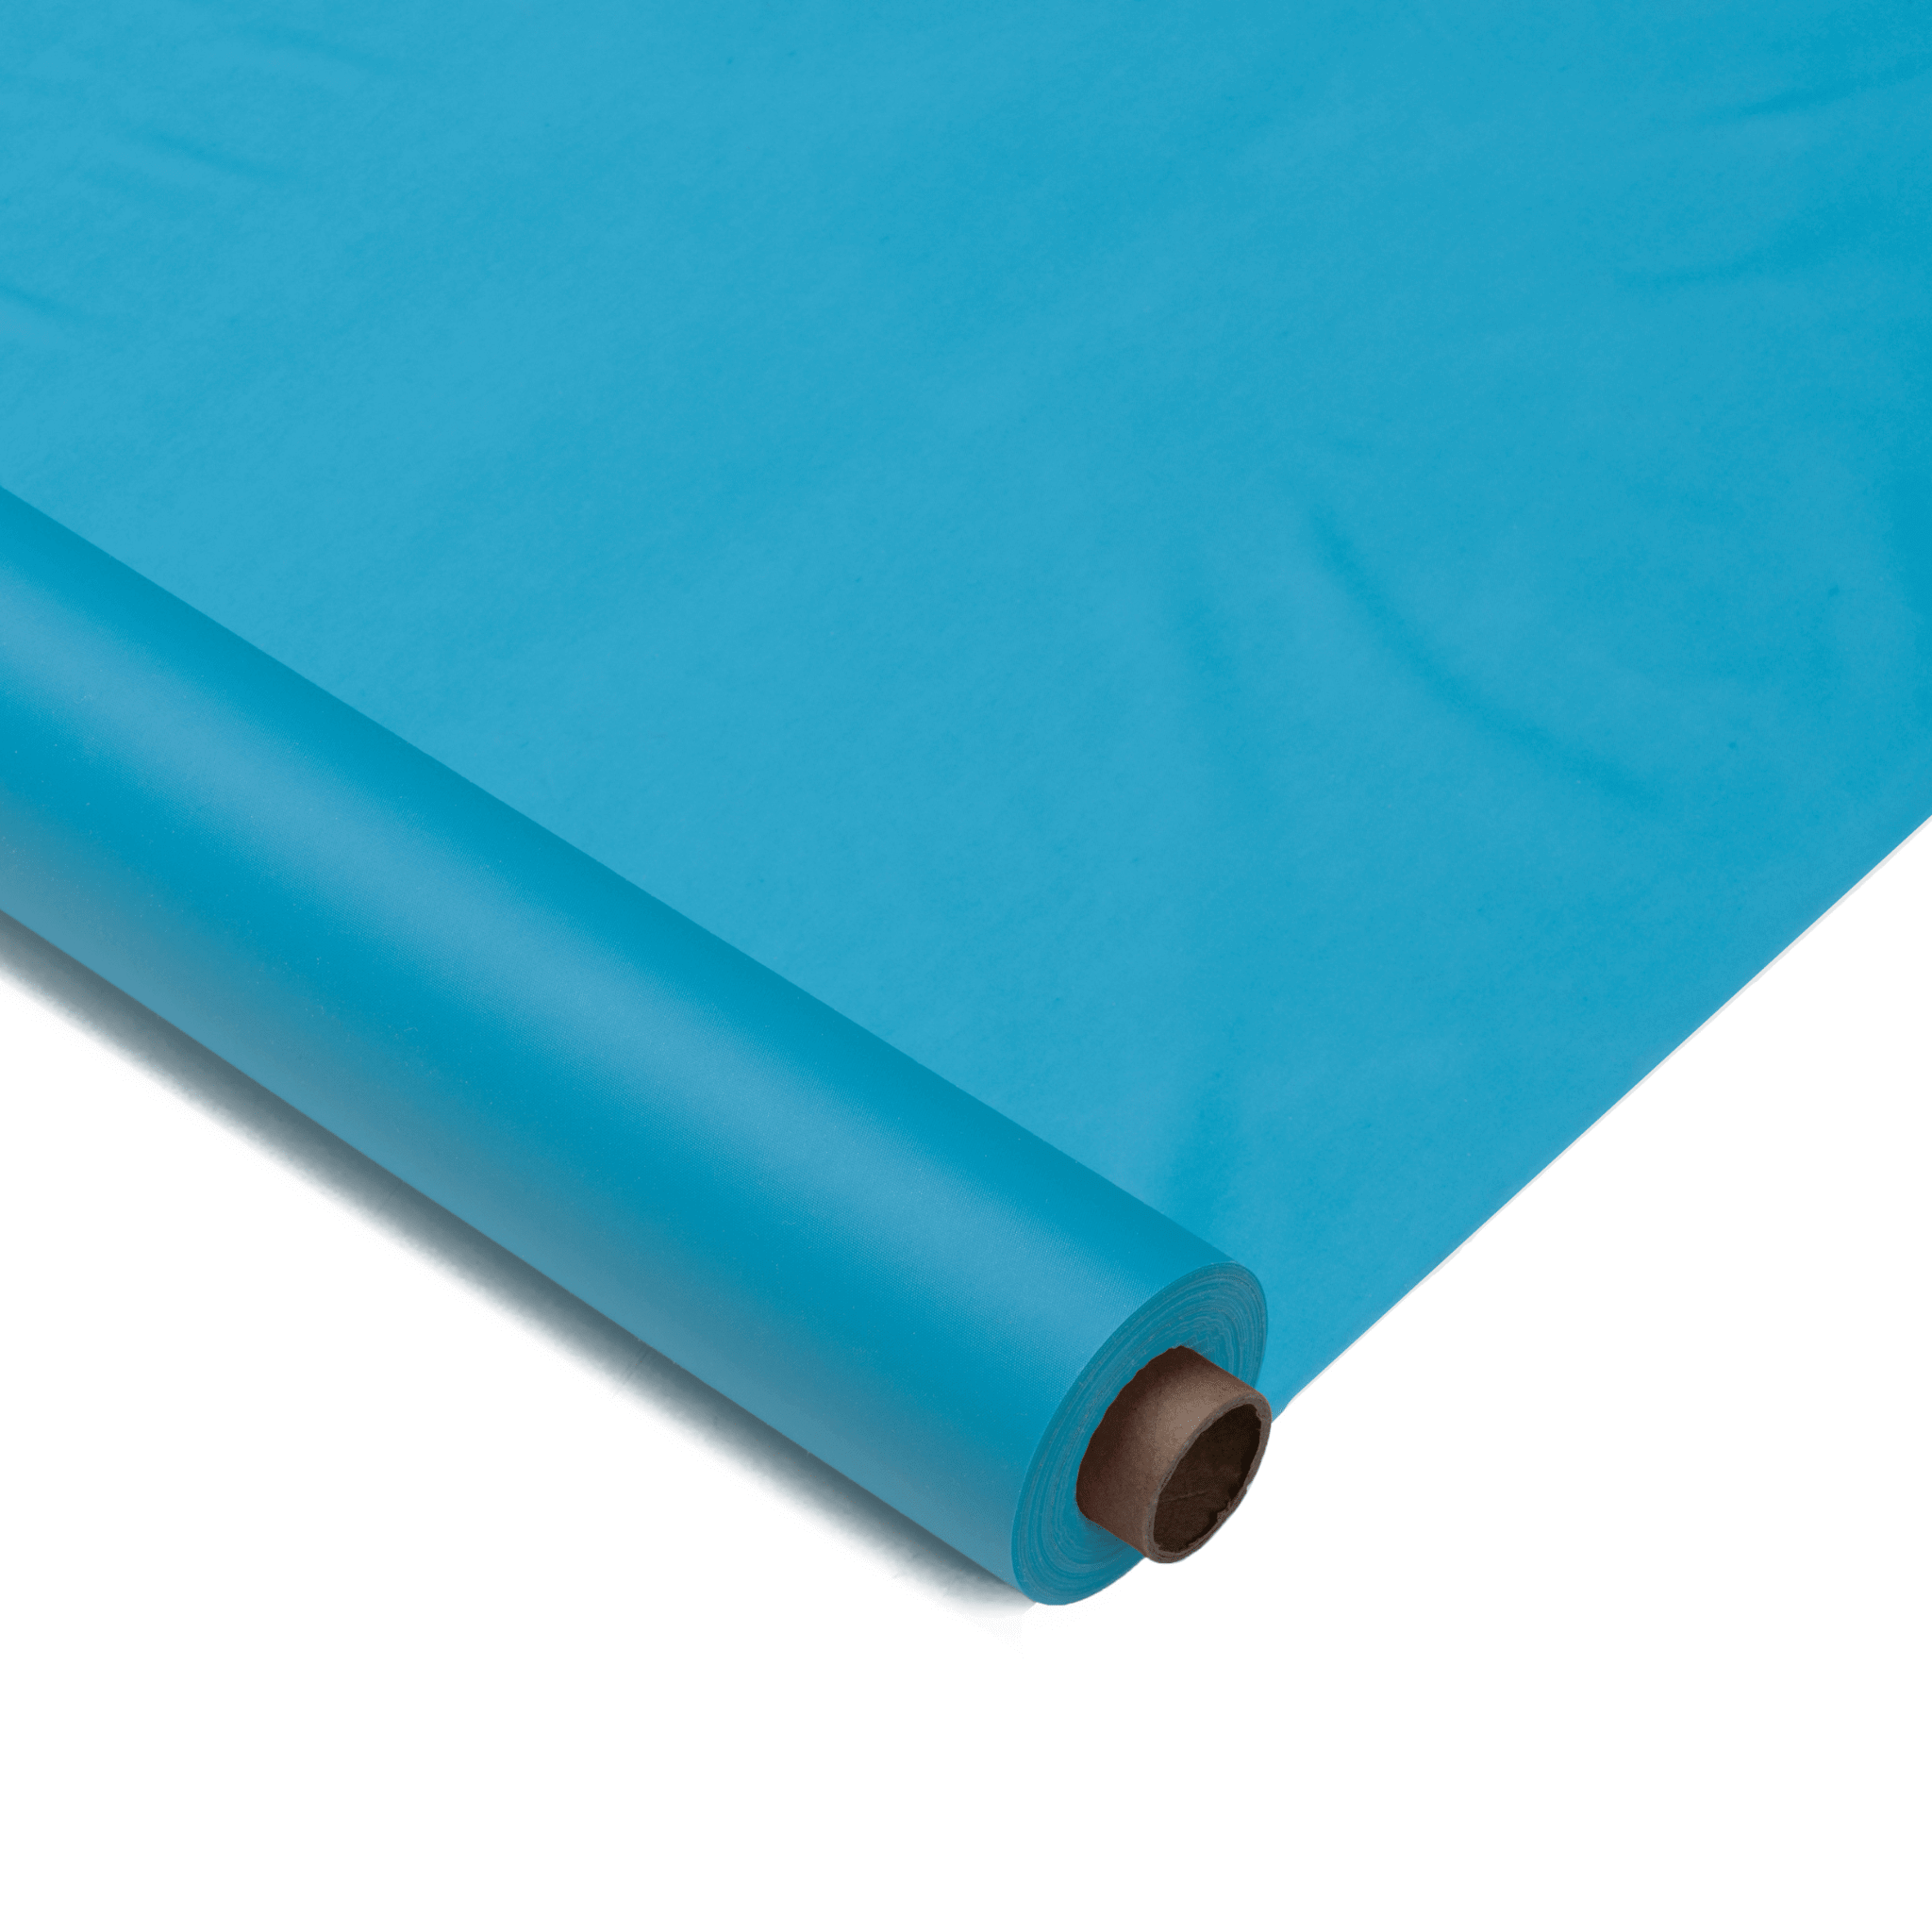 40 In. X 100 Ft. Premium Turquoise Plastic Table Roll | 6 Pack - Yom Tov Settings